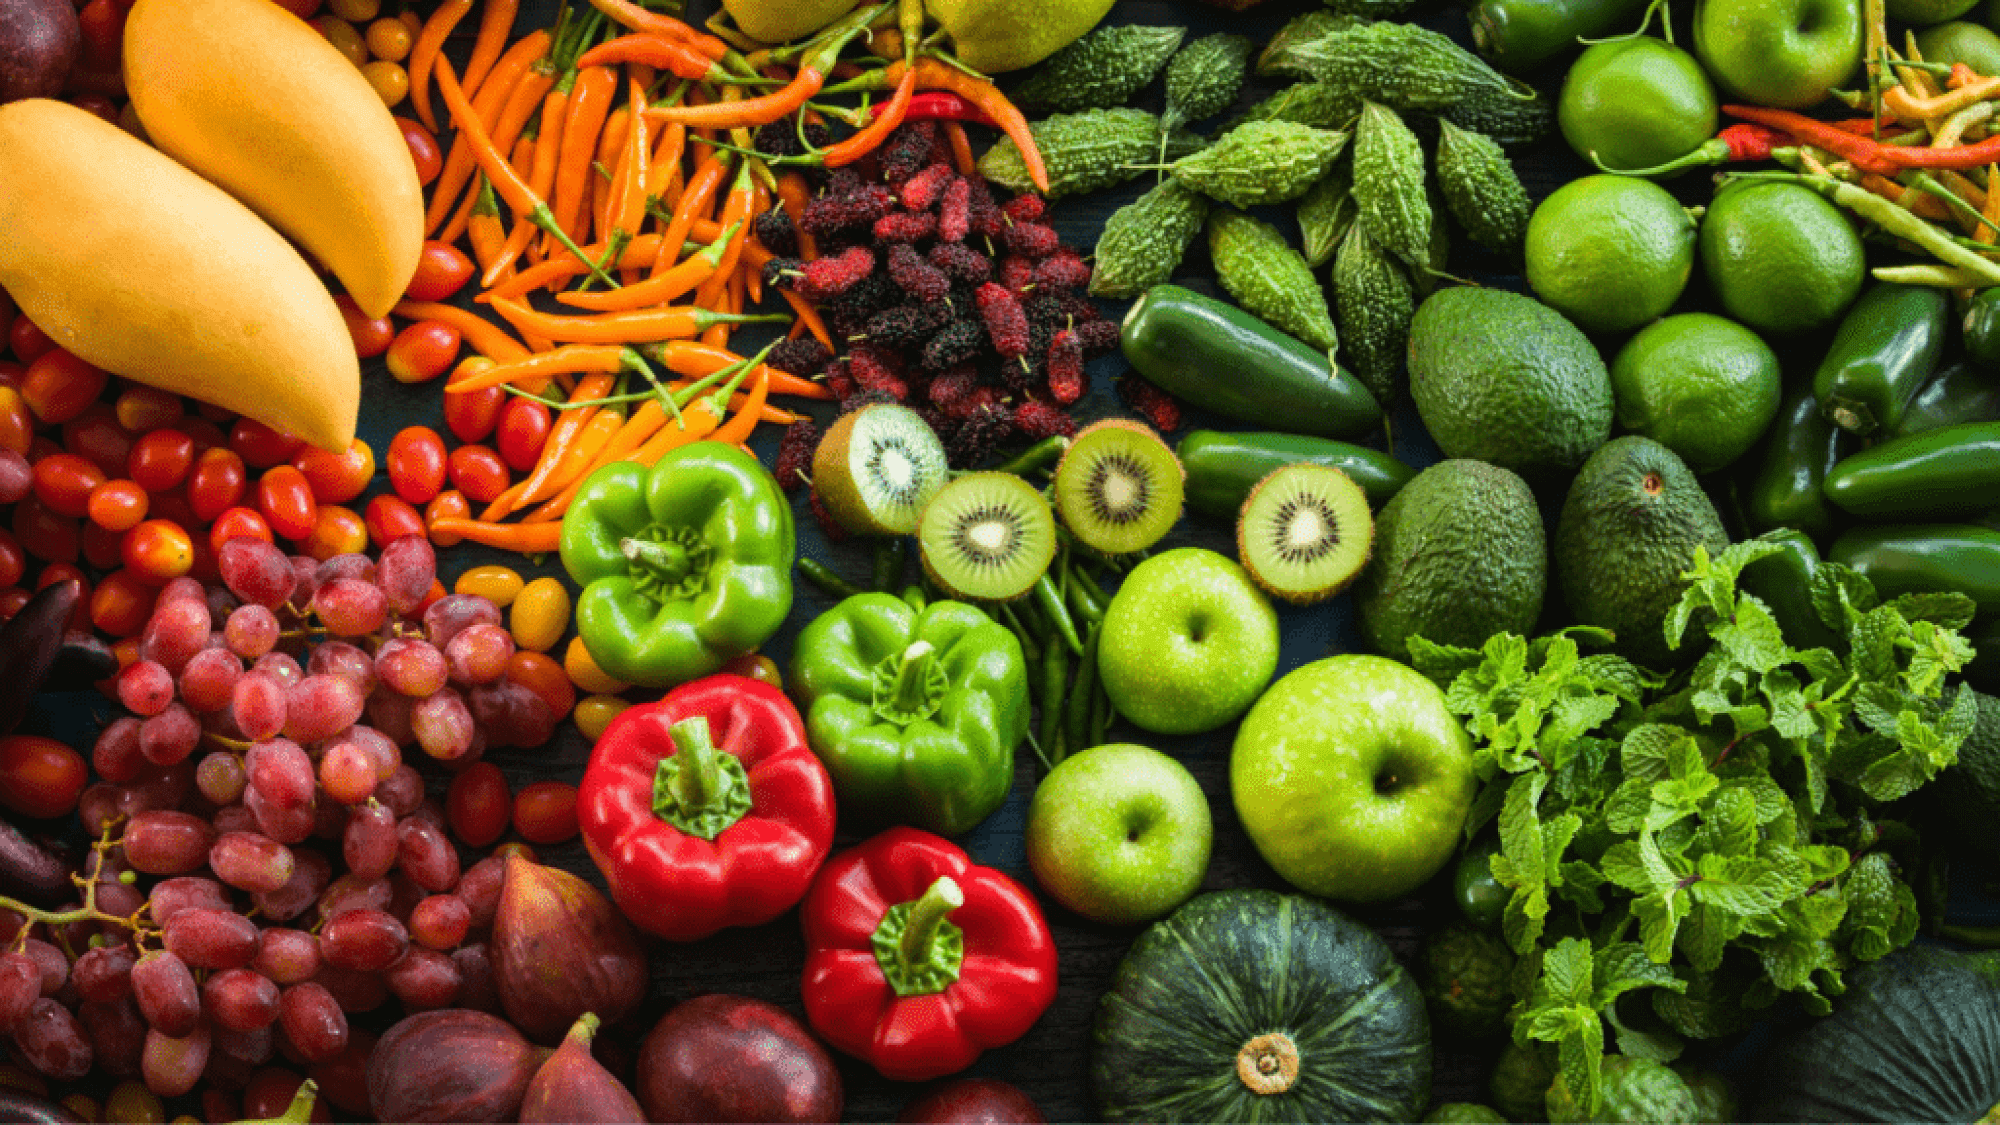 Colorful produce